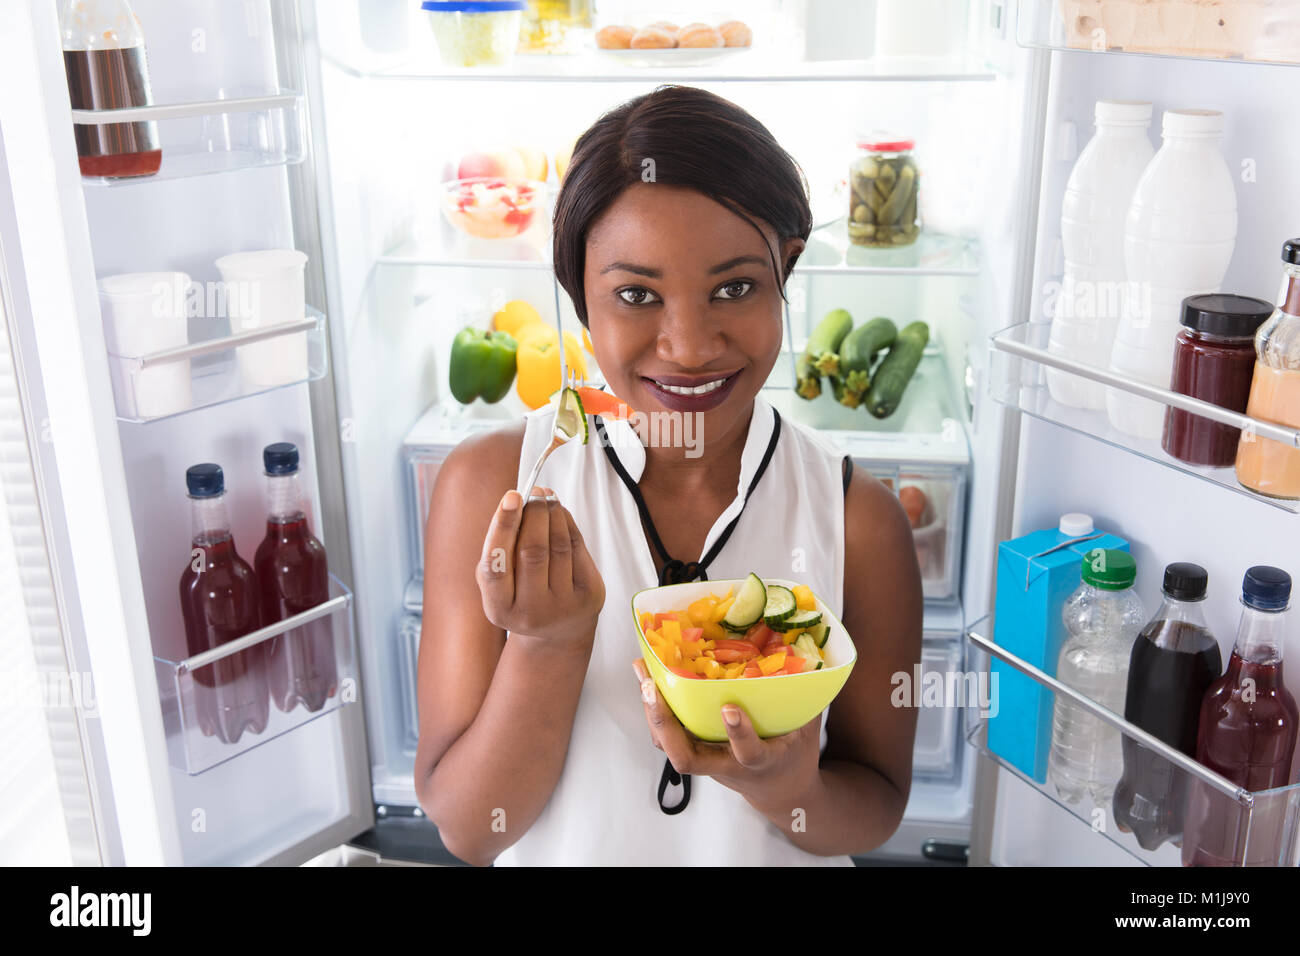 Portrait Of A Happy Young African Woman Eating Fruits In Bowl Stock Photo